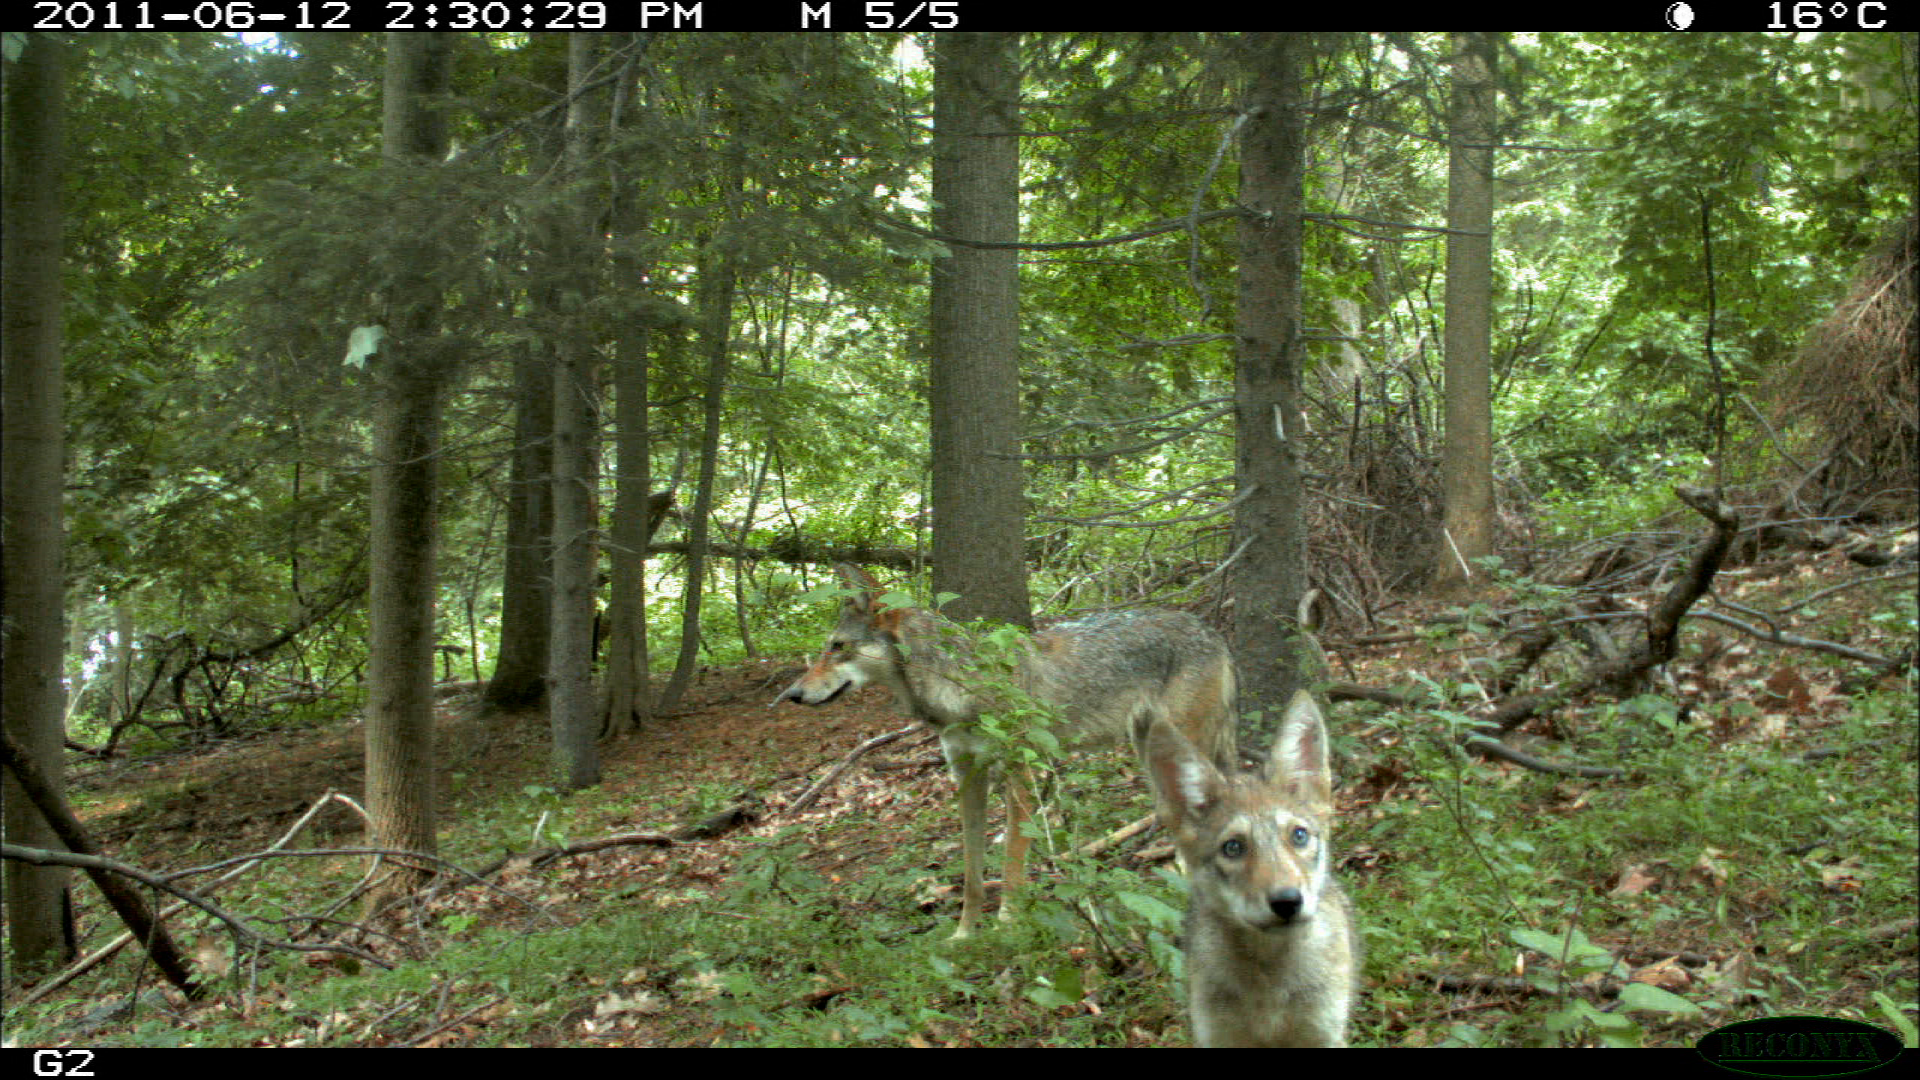 Coyote and Fox Populations on the Rise? – The Academy of Natural Sciences